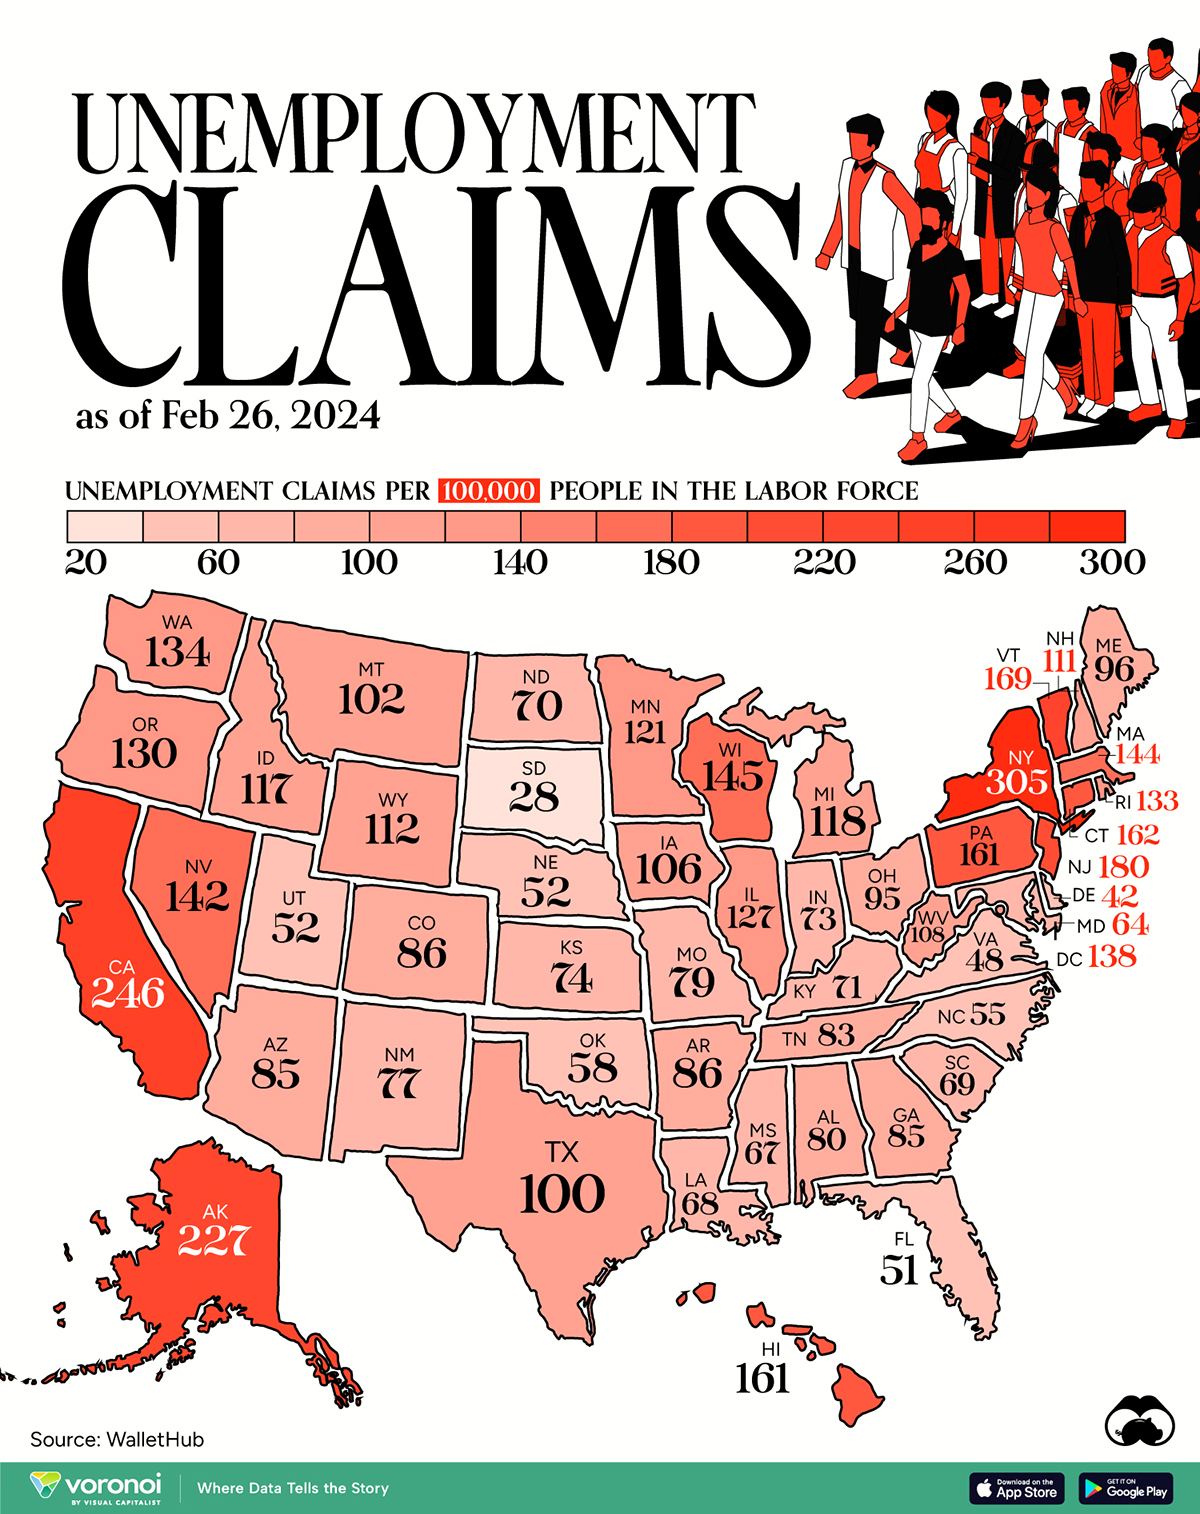 Map showing unemployment claims by state as of Feb 2024